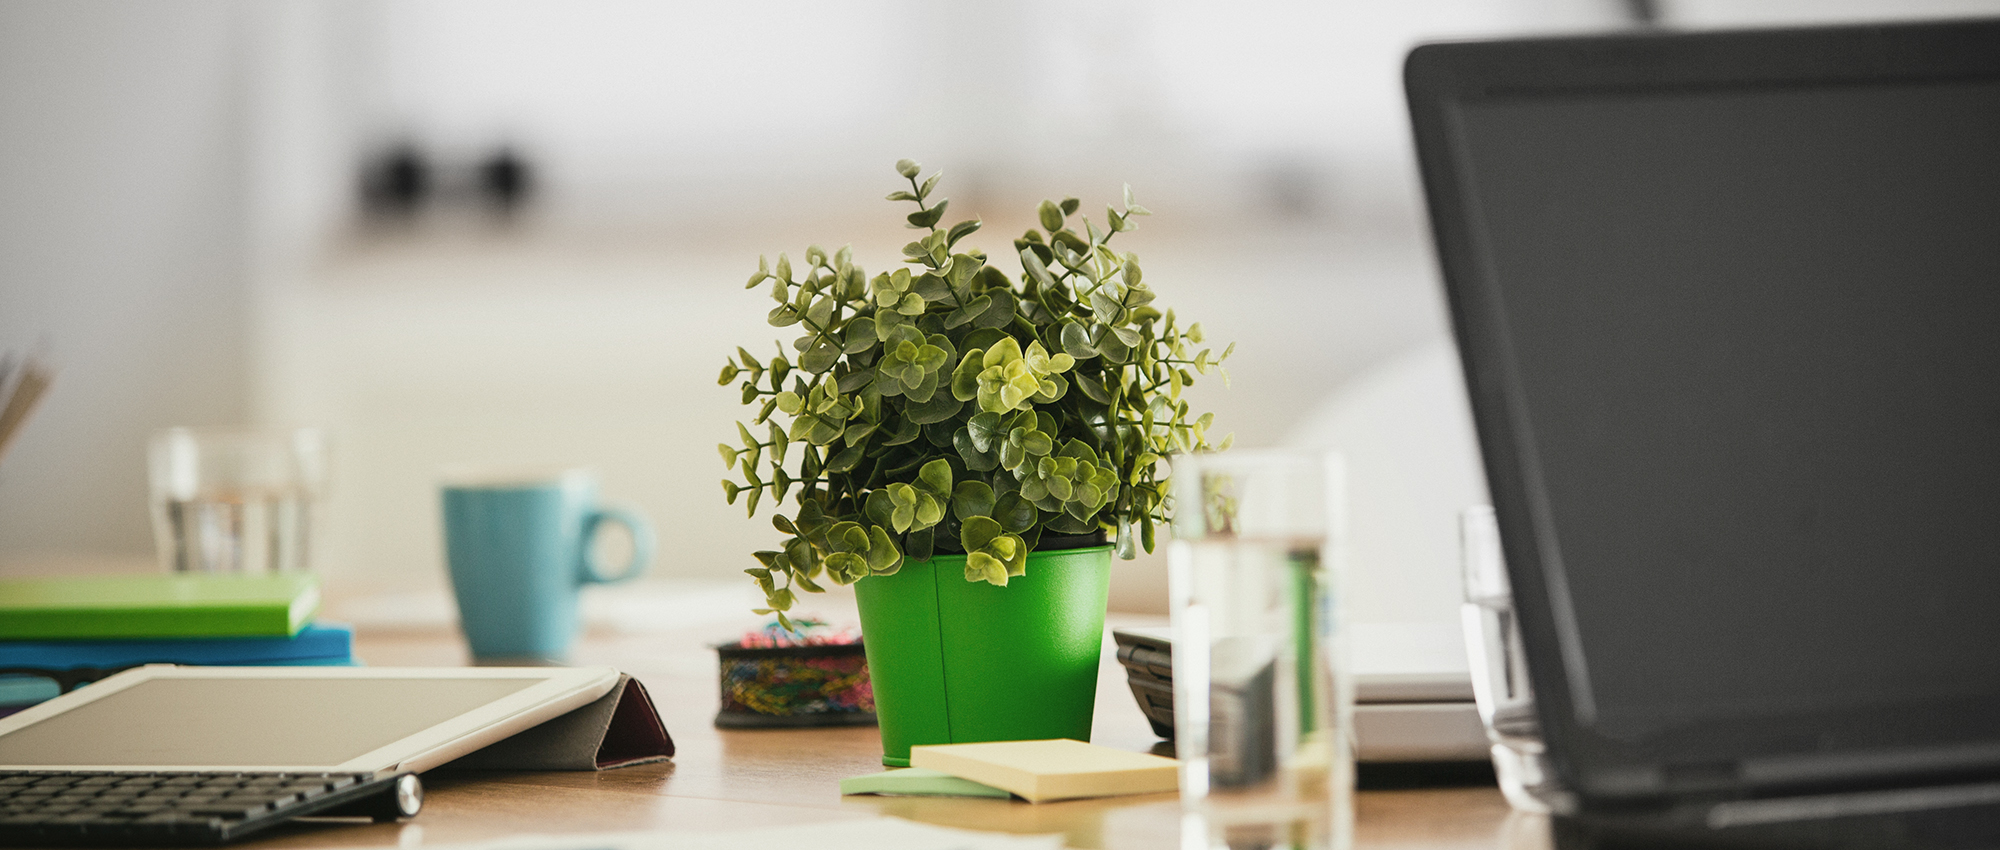 Choosing The Best Plants For Your Desk Improving Your Office